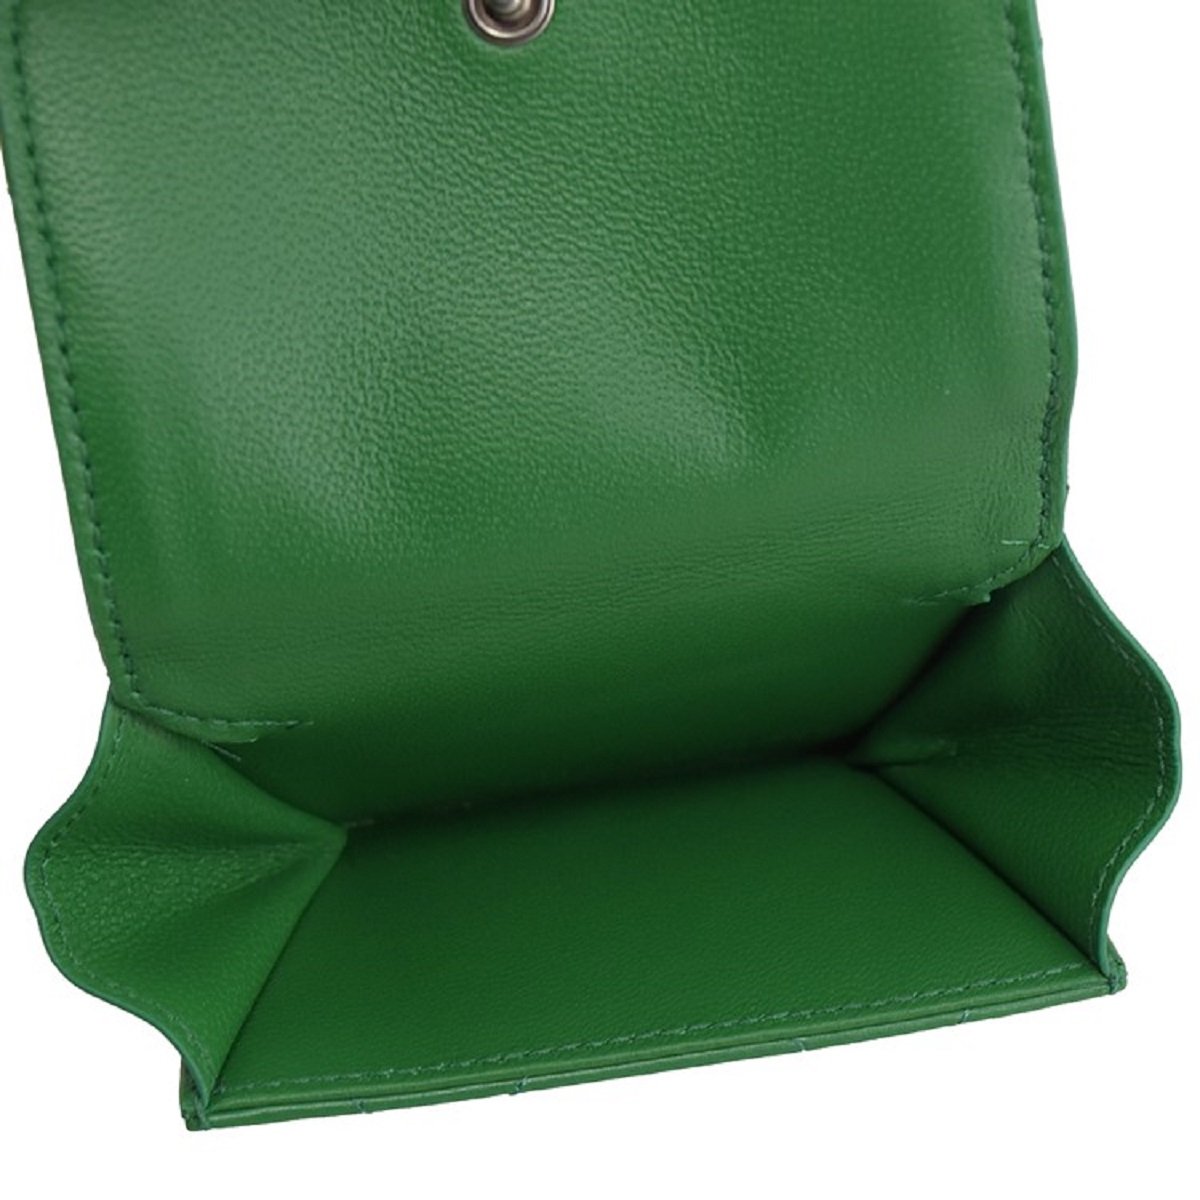 Balenciaga Touch Leaf Green Nappa Leather Quilted Mini Trifold Wallet - LUXURYMRKT